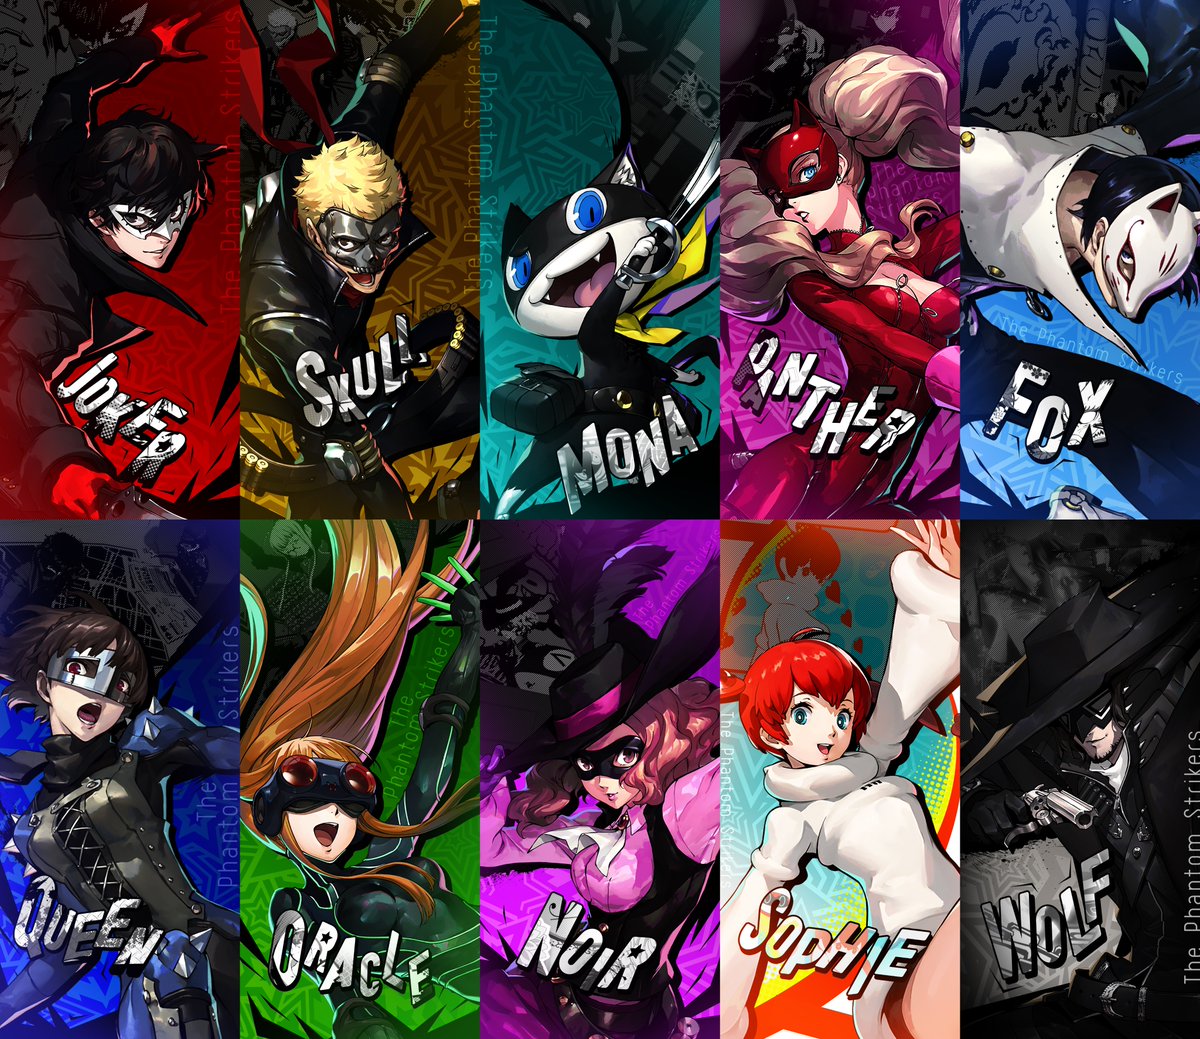 NightTIDE Phantom Thieves of Hearts are all here! Based on their art from Persona 5 Strikers, you can download them as mobile wallpaper (as well as other art) right